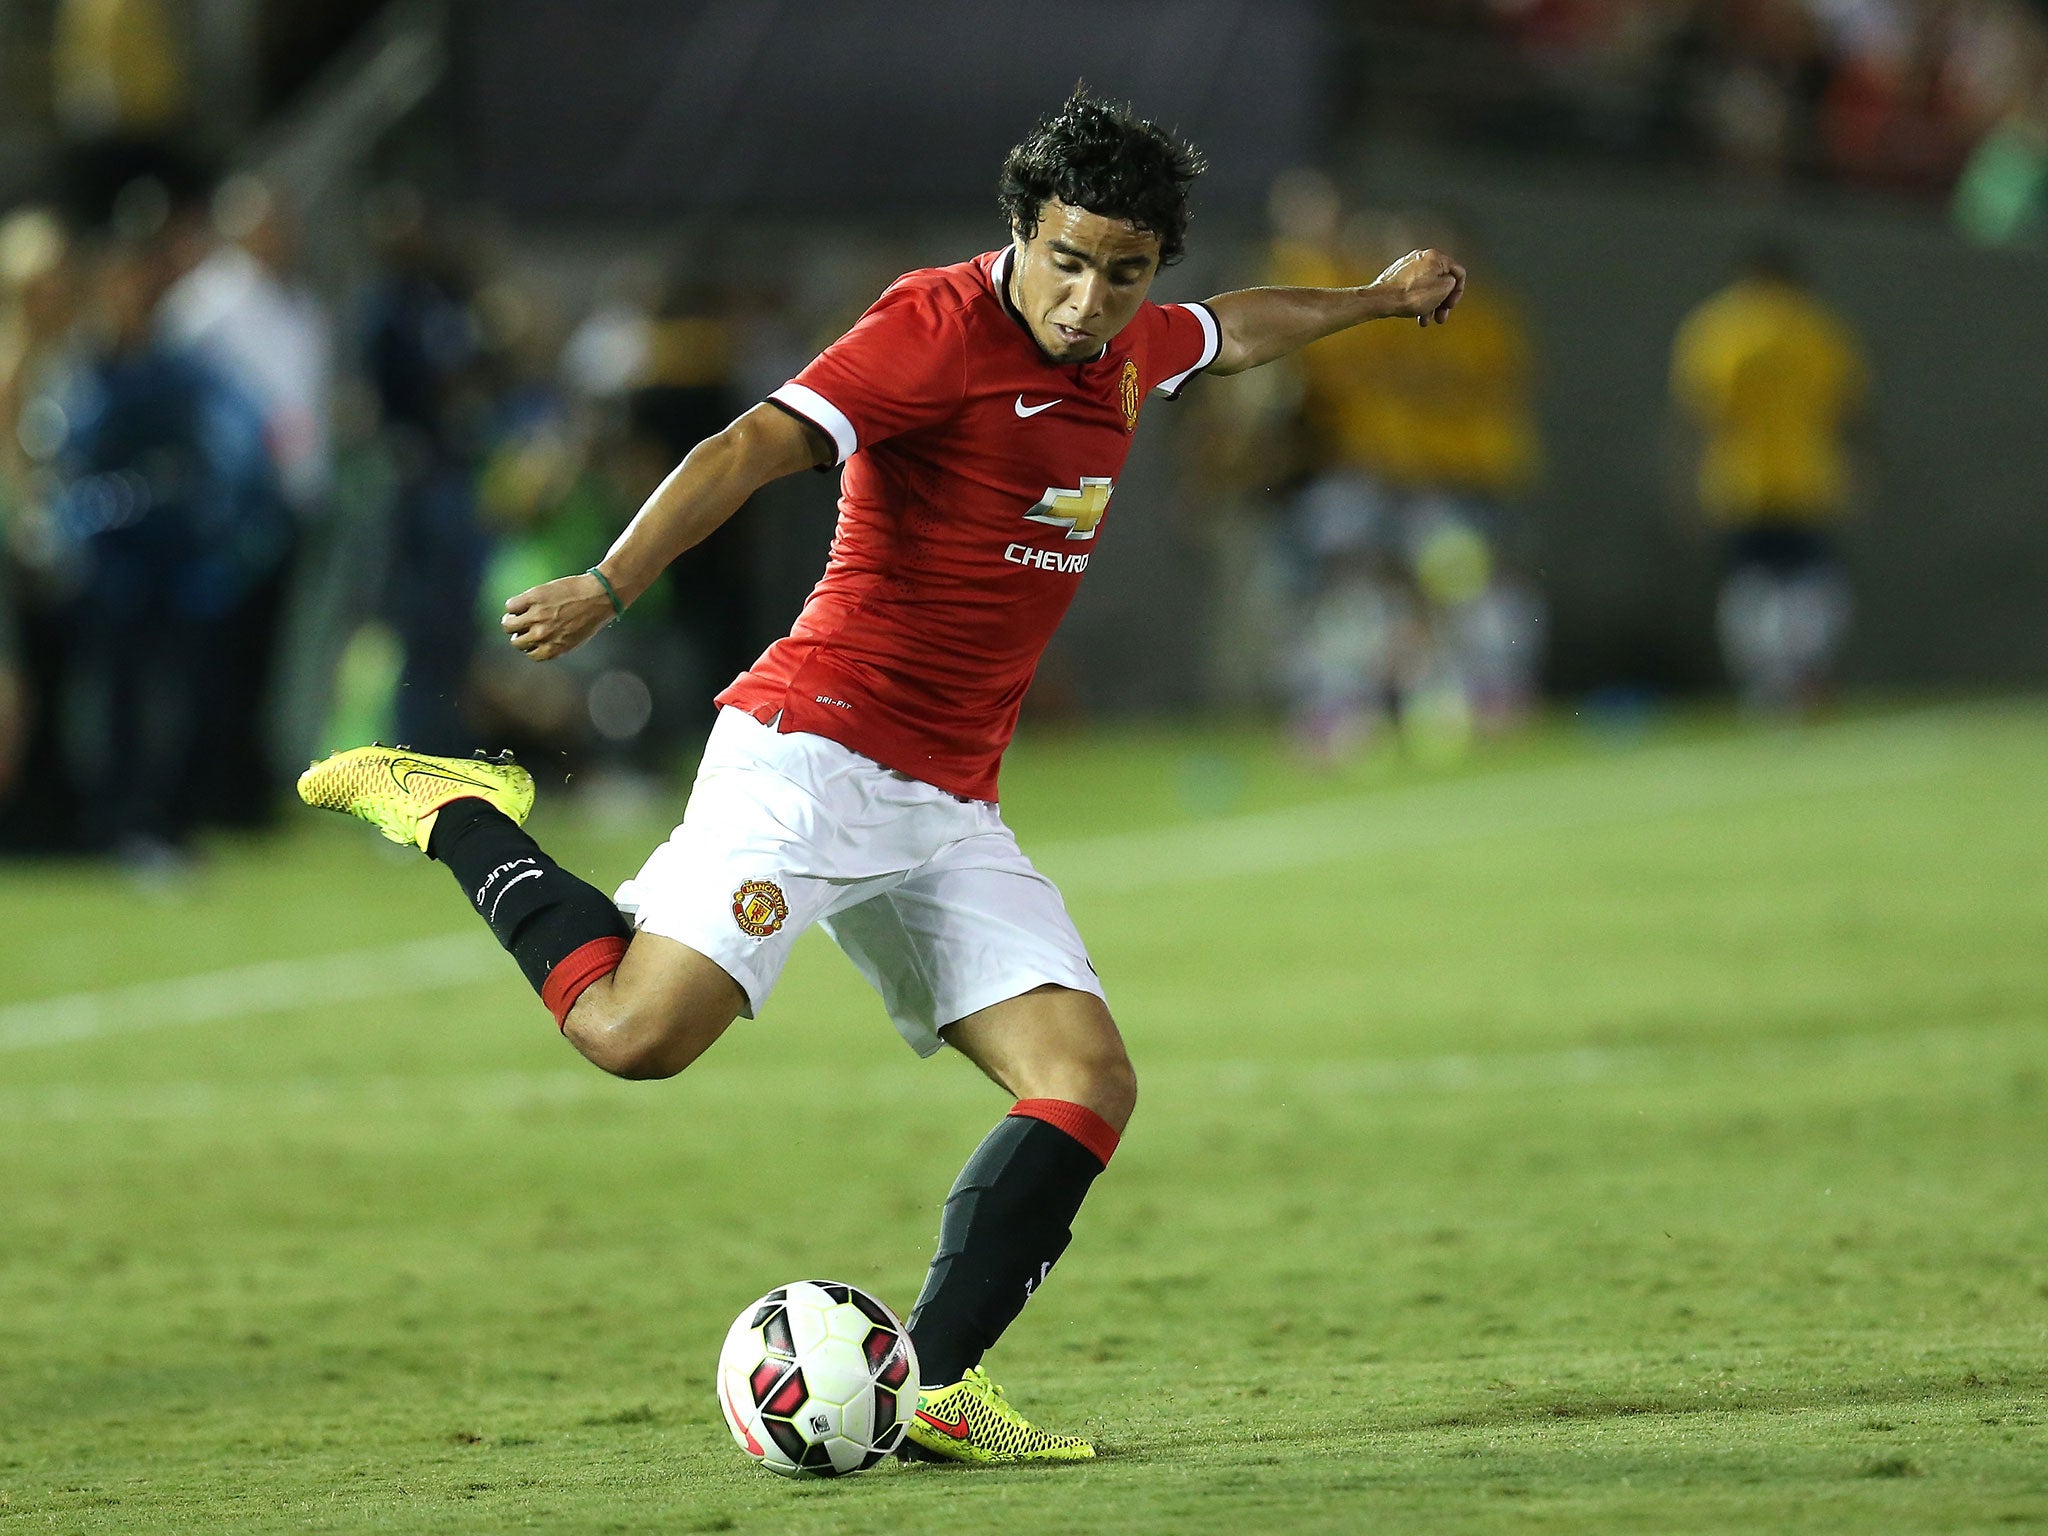 Manchester United defender Rafael has been forced to fly home from the tour of the United States with a groin injury